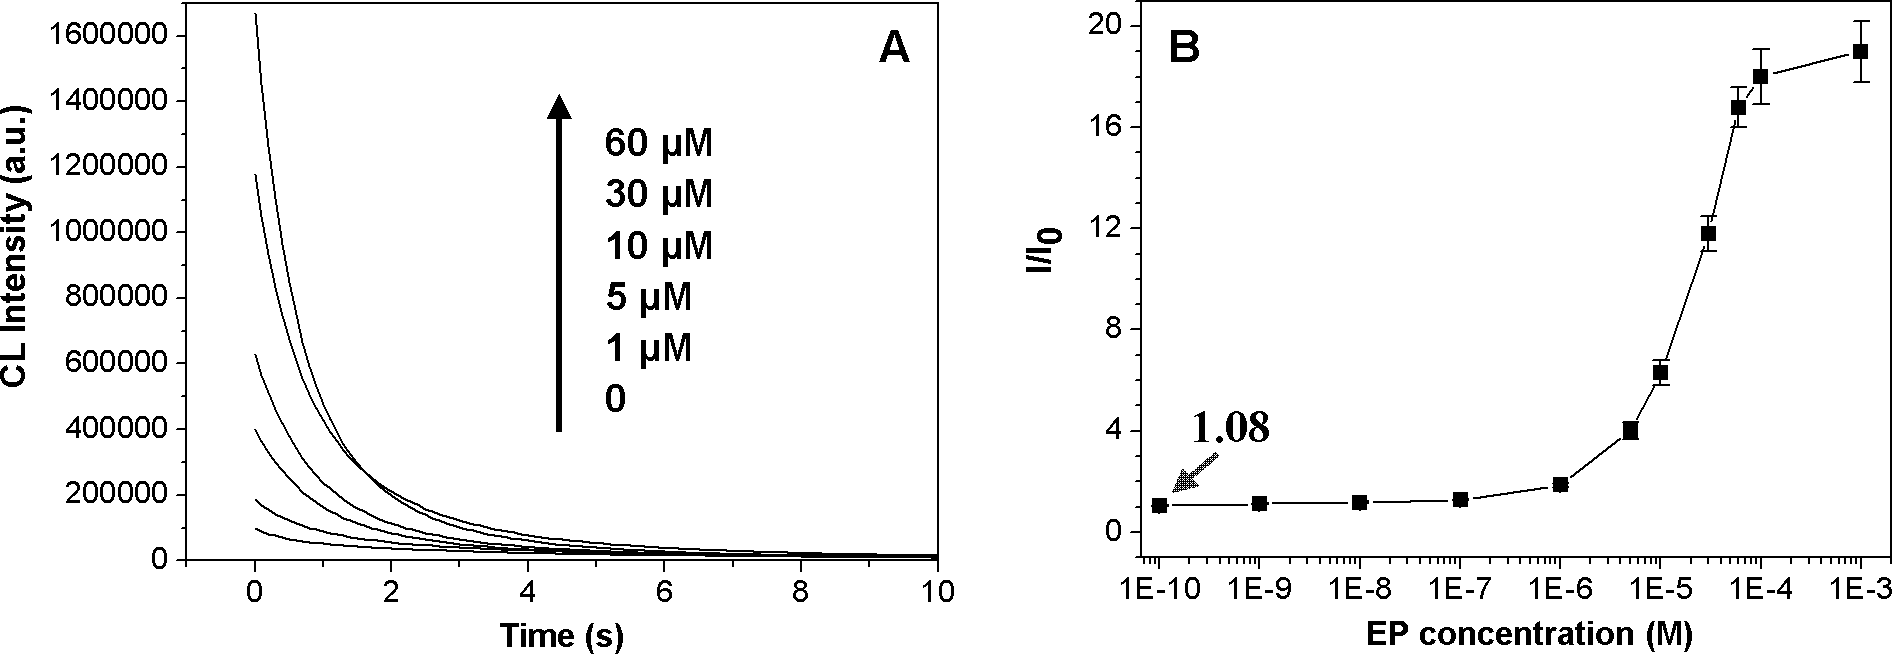 Chemical luminescence enhanced type method for detecting pesticide residues